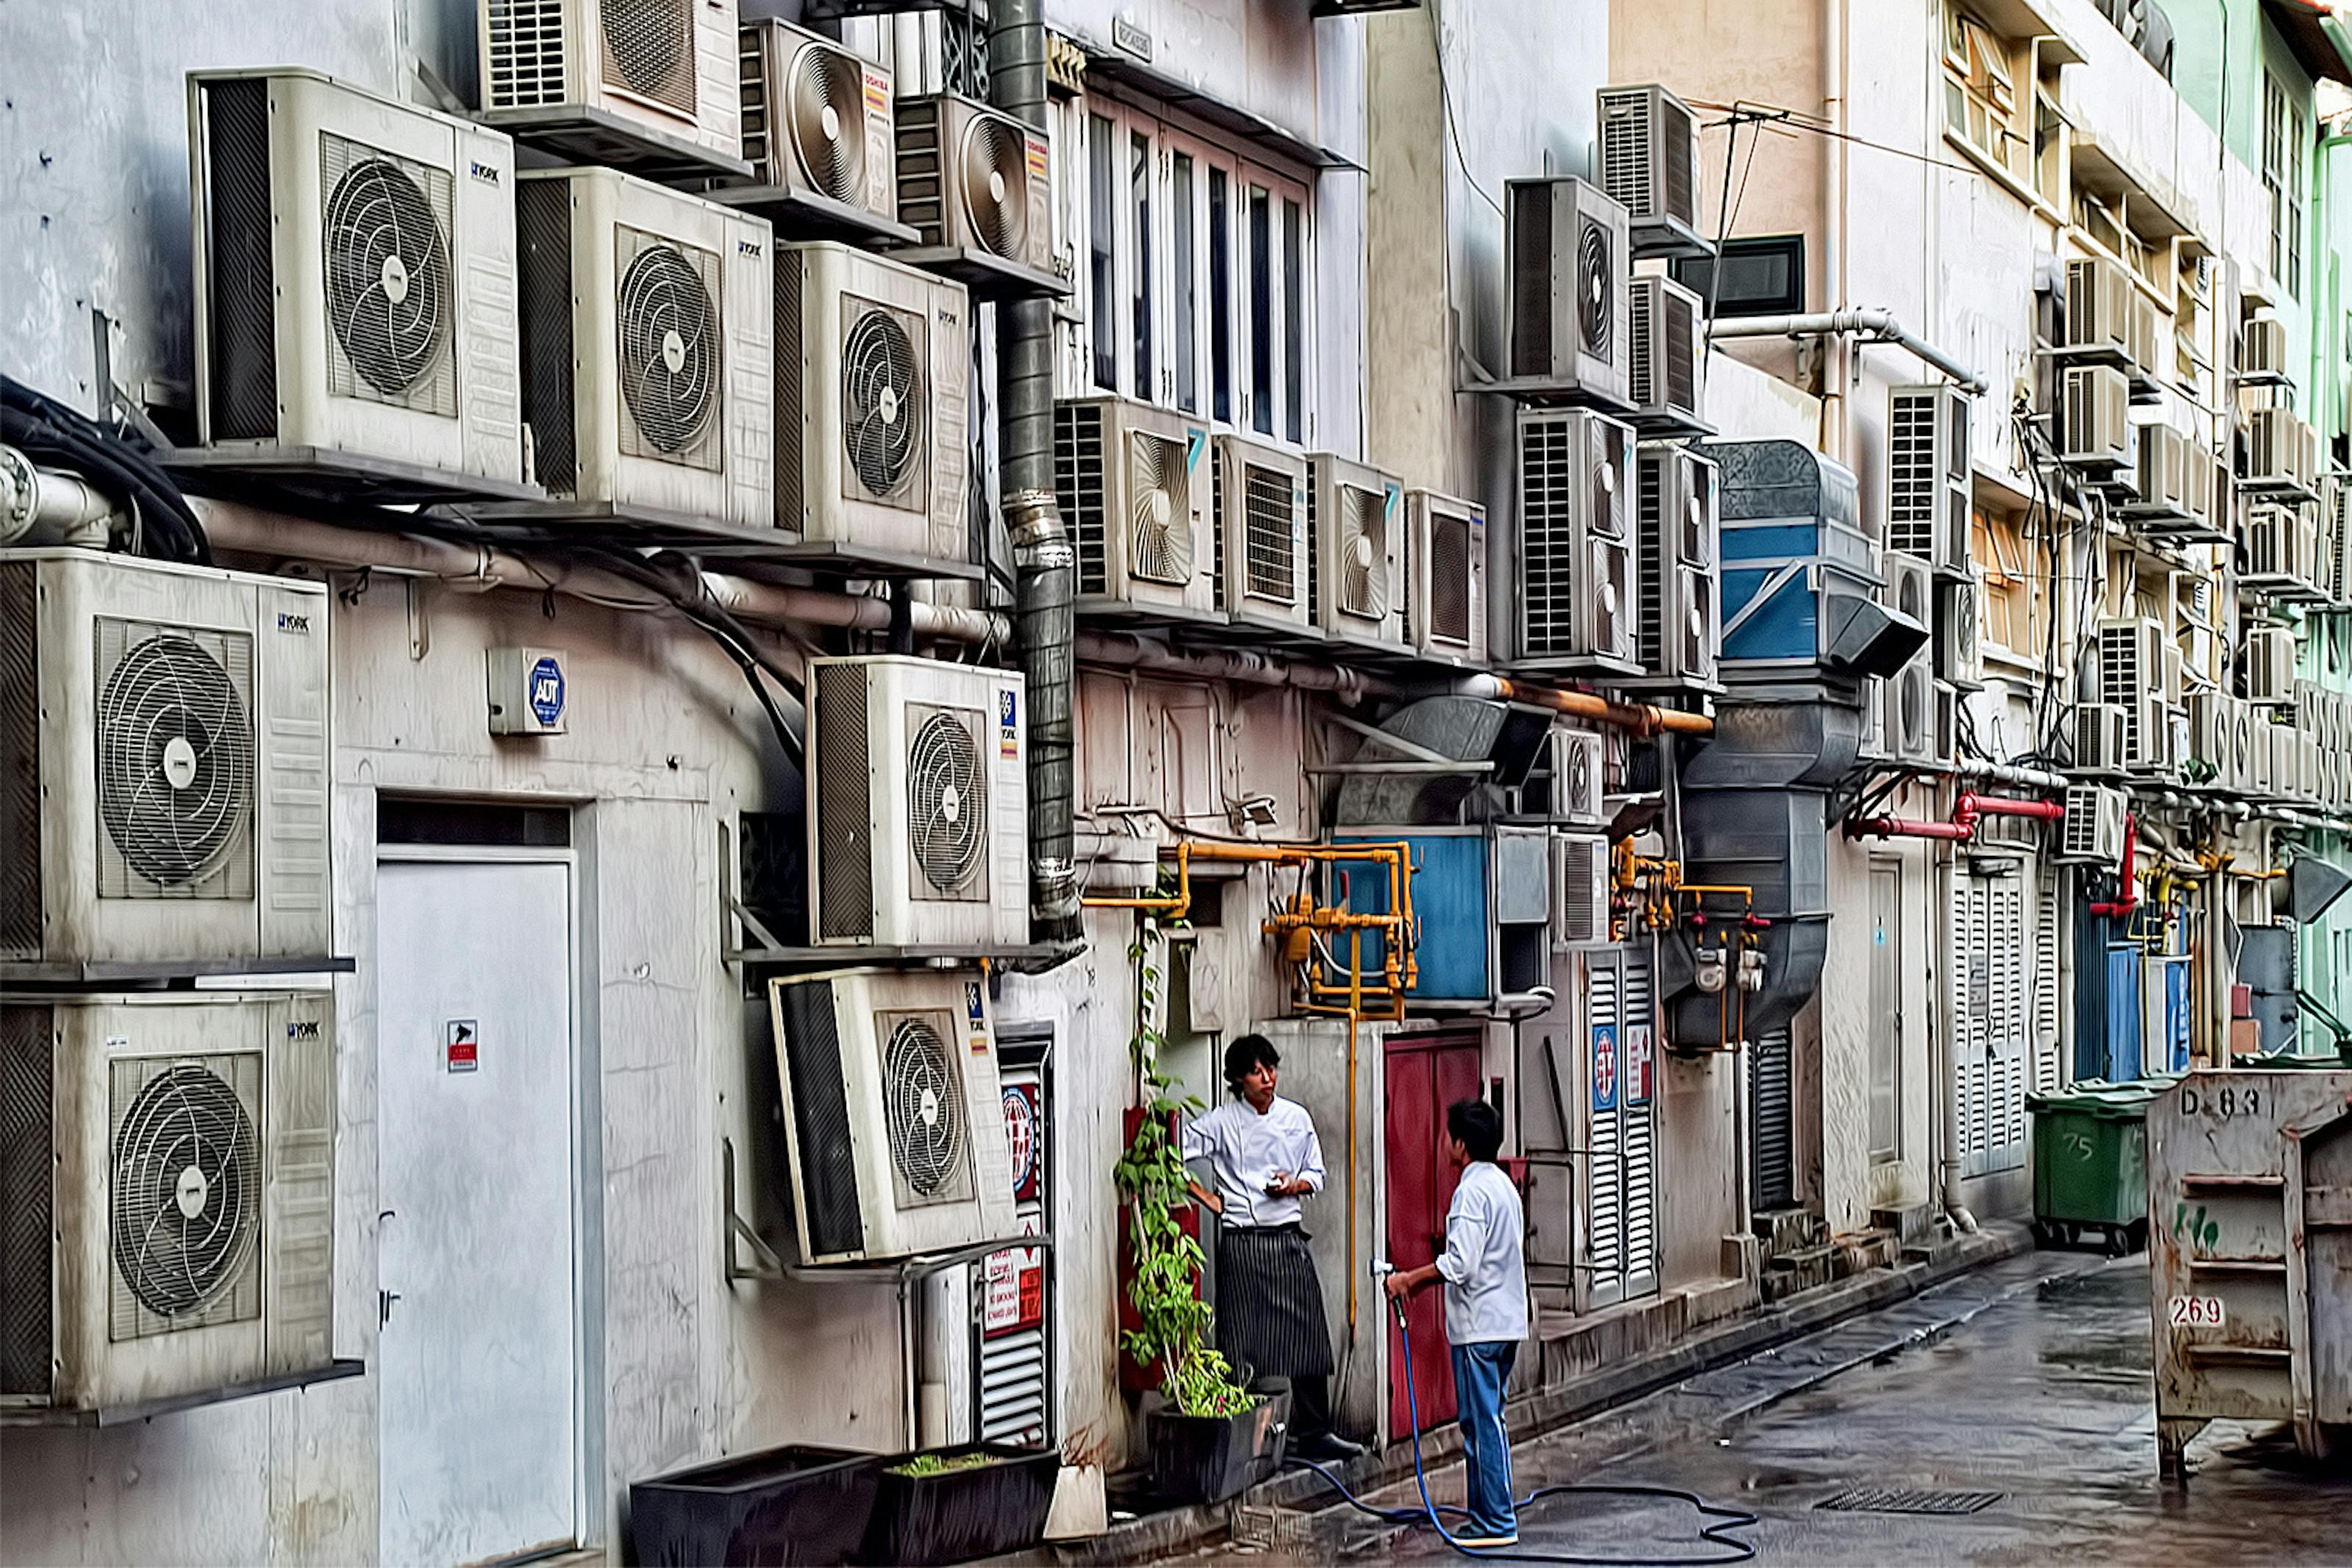 Air conditioner compressors occupy almost all the open space available on the wall of a building in Boat Quay, Singapore